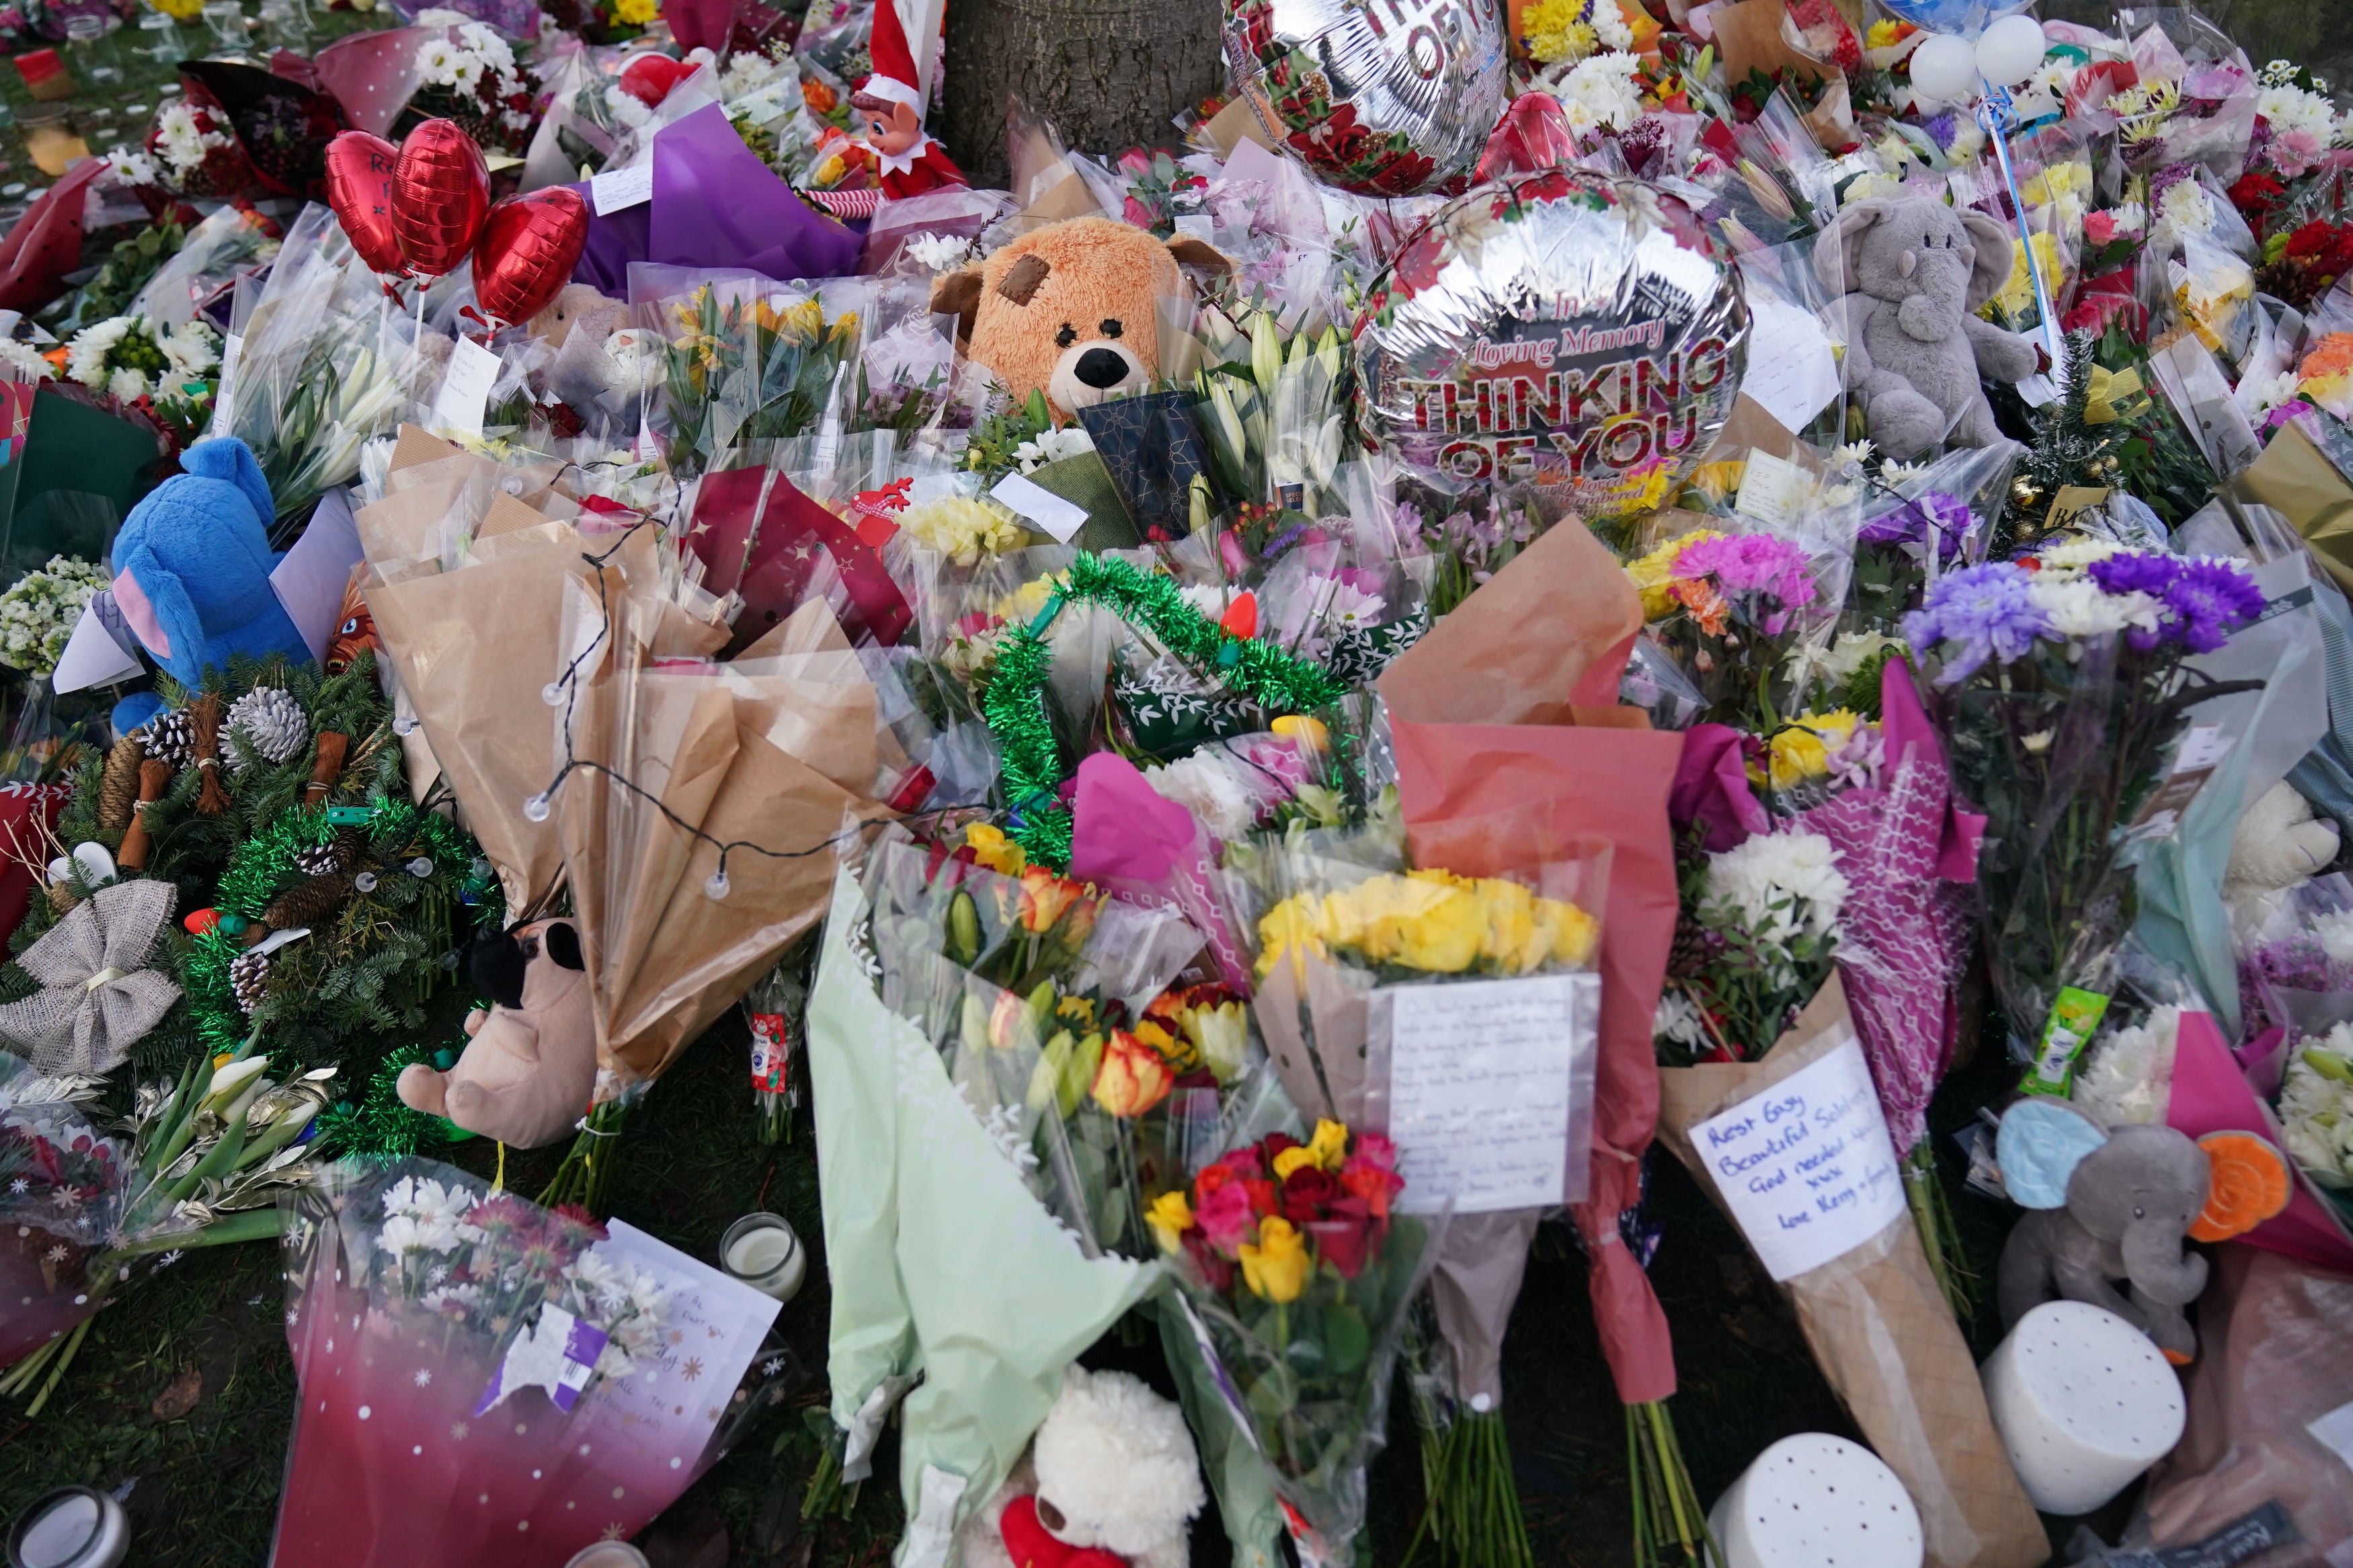 Flowers and tributes near to Babbs Mill Park in Kingshurst, Solihull, after the deaths of three boys aged eight, 10 and 11 who fell through ice into a lake in the West Midlands